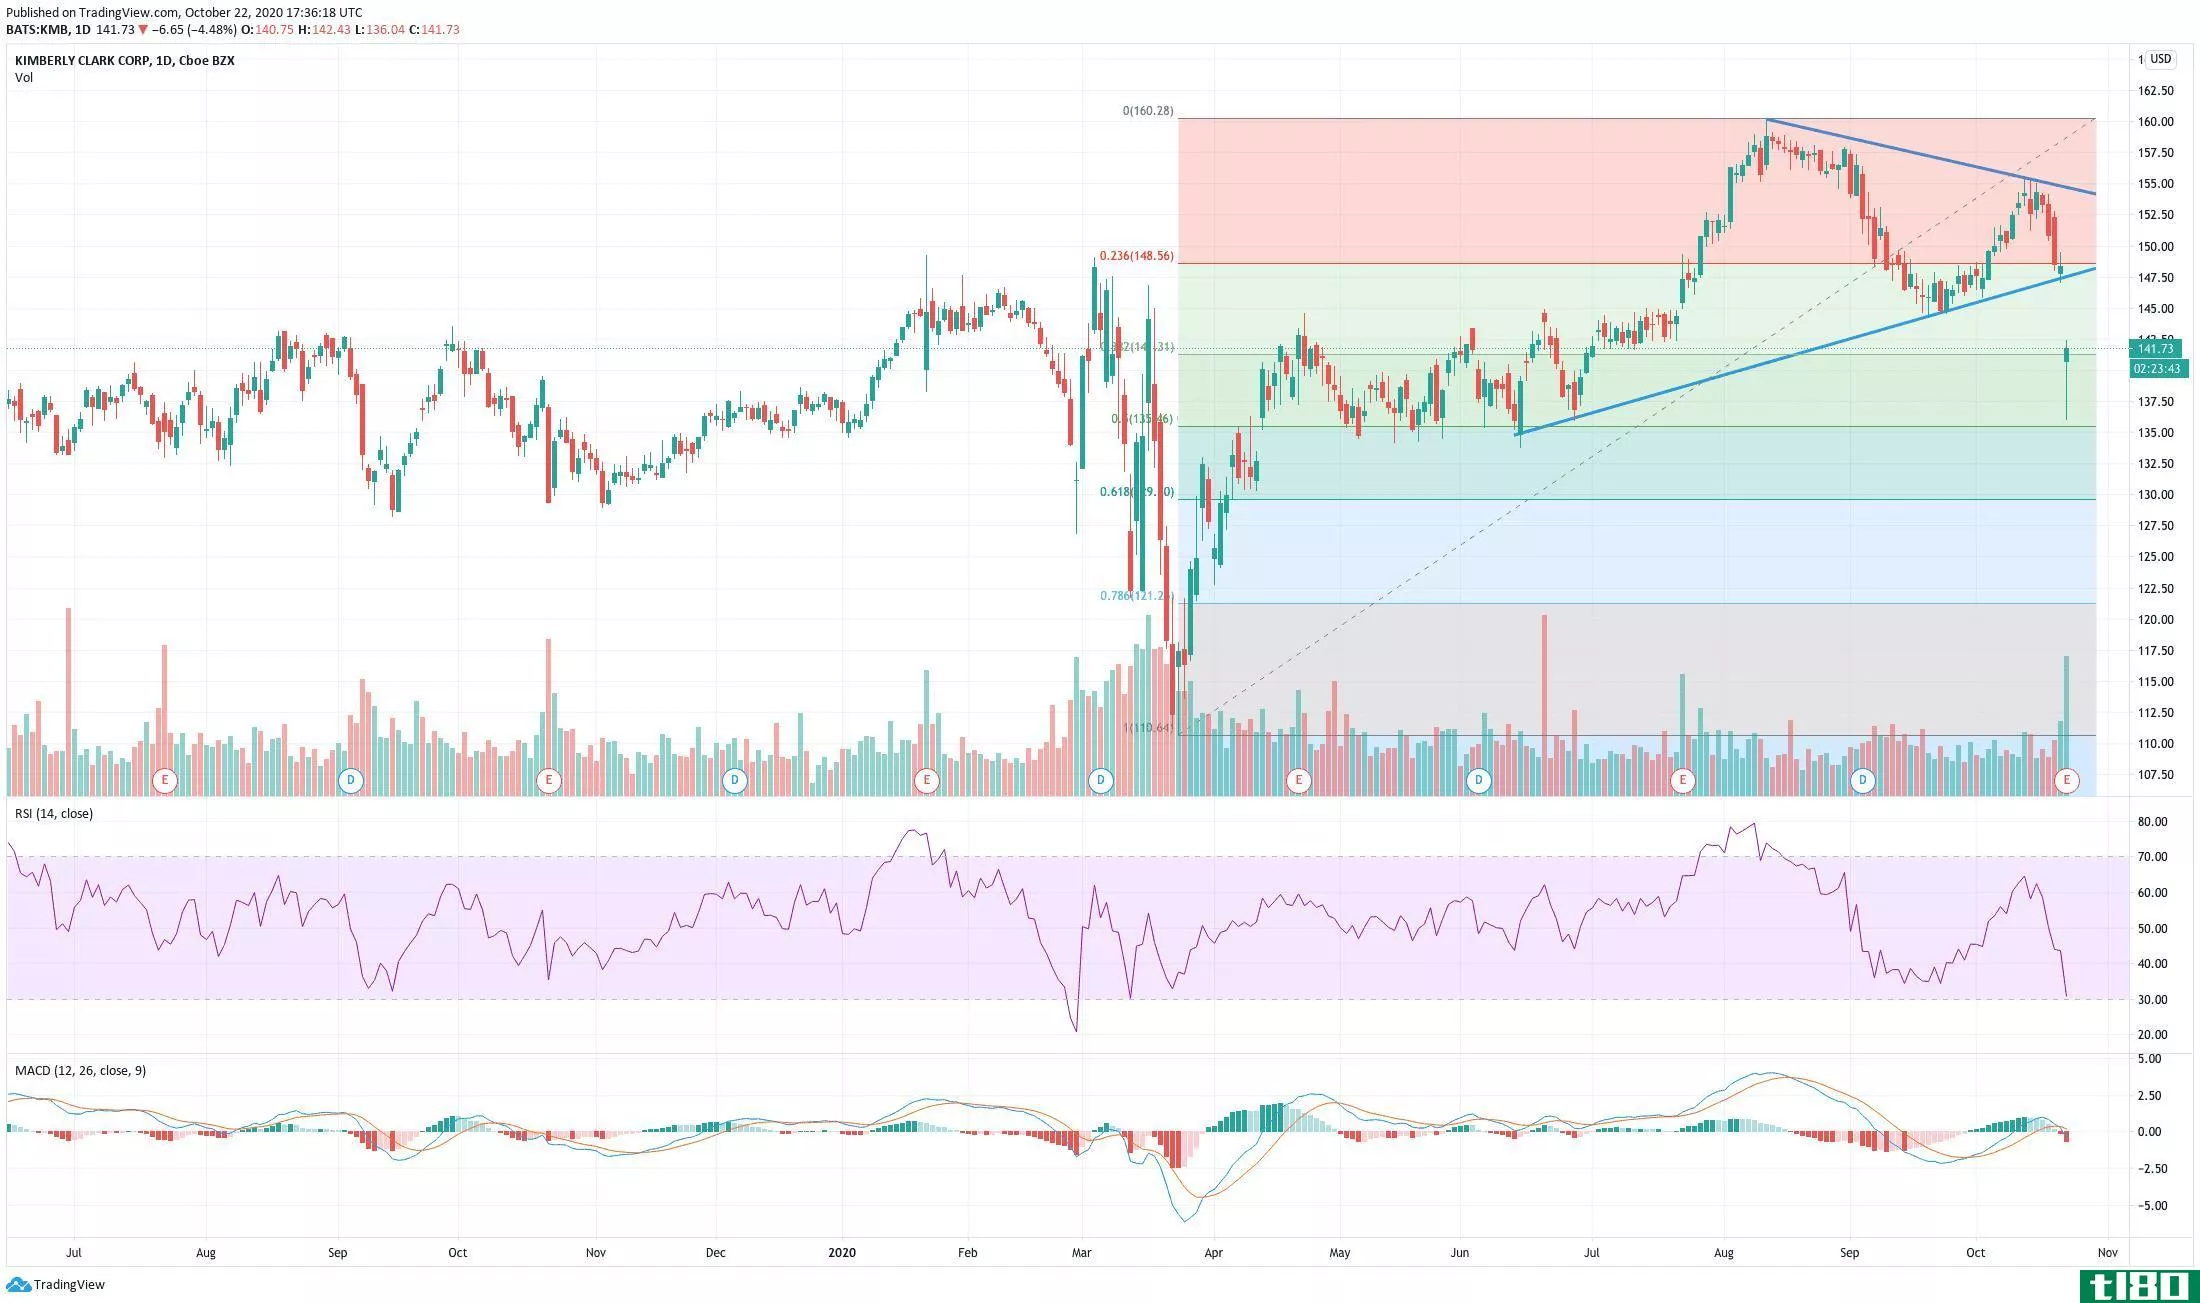 Chart showing the share price performance of Kimberly-Clark Corporation (KMB)